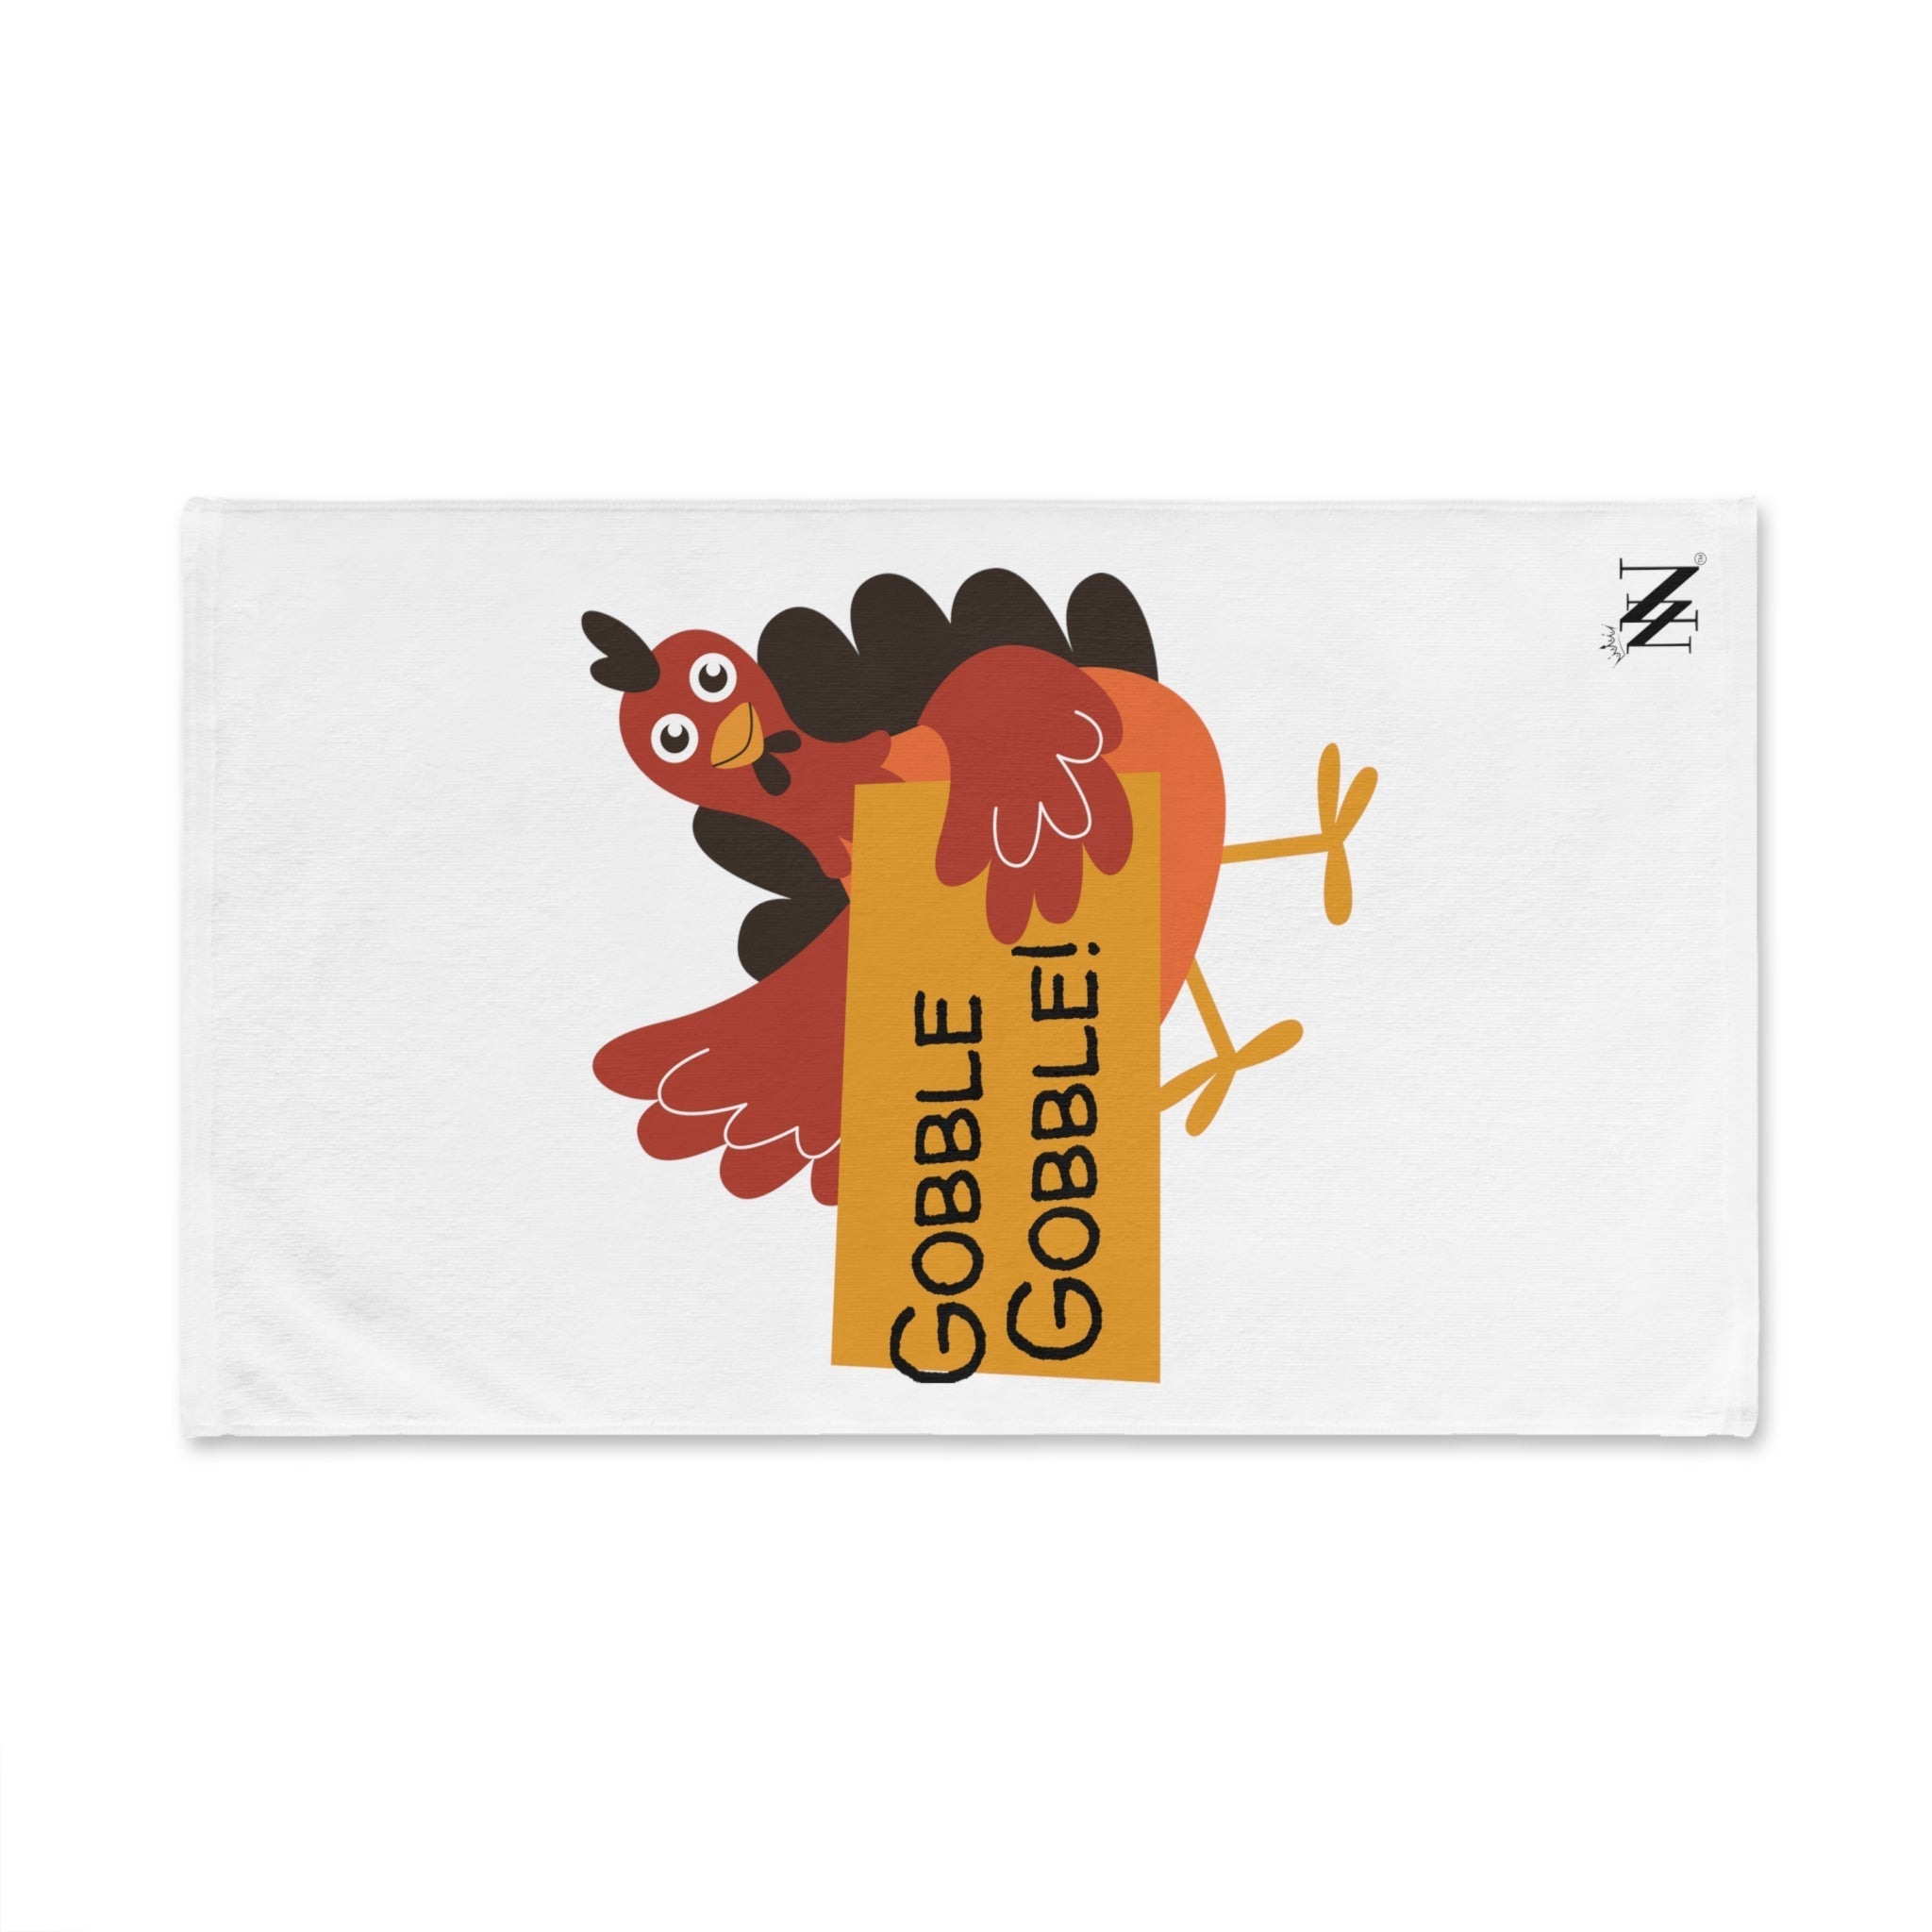 Gobble Turkey Thanks White | Funny Gifts for Men - Gifts for Him - Birthday Gifts for Men, Him, Her, Husband, Boyfriend, Girlfriend, New Couple Gifts, Fathers & Valentines Day Gifts, Christmas Gifts NECTAR NAPKINS